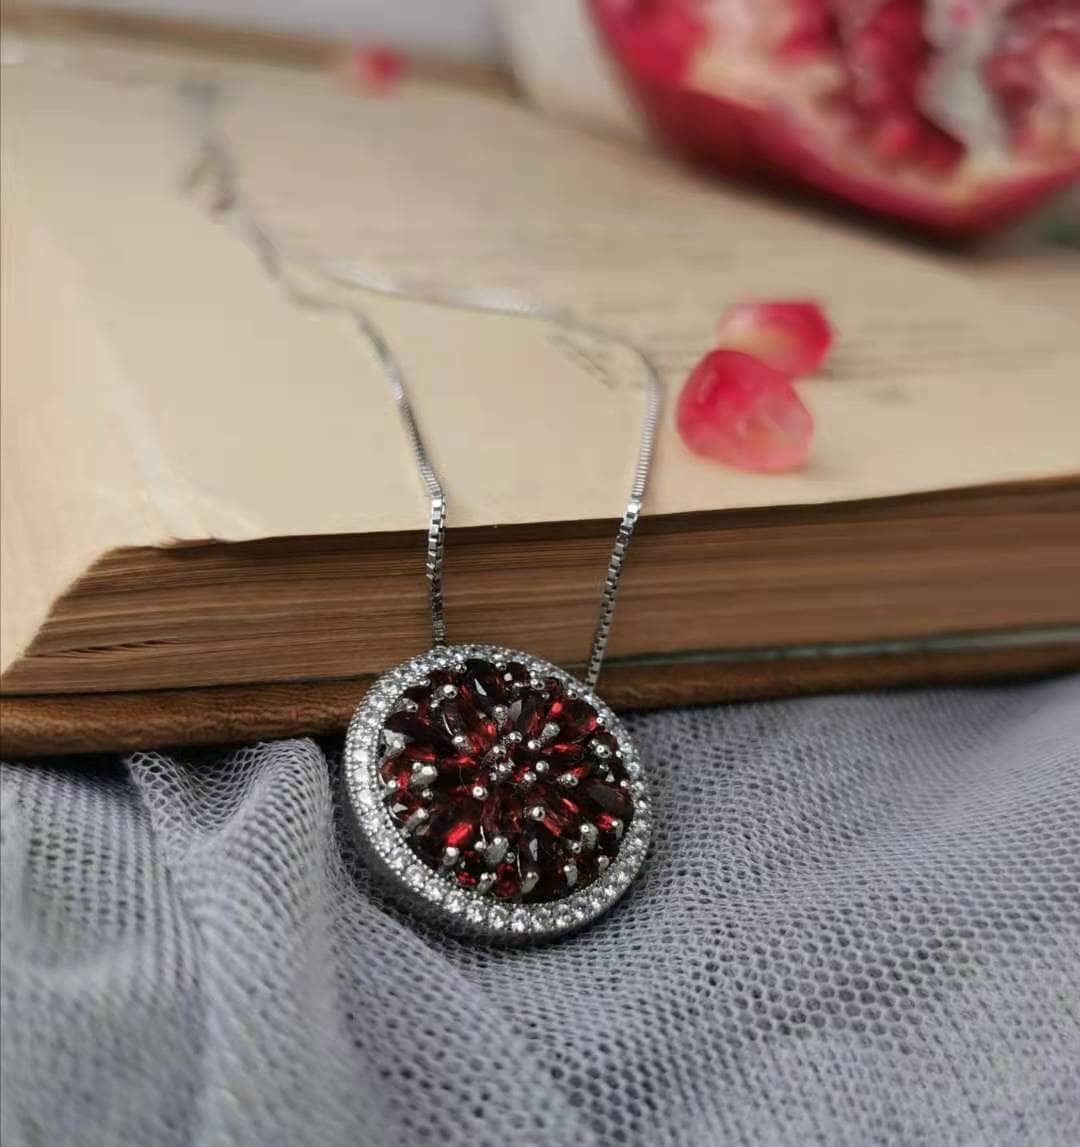 Buy Mozambique Garnet Earrings and Pendant Necklace Jewelry Set, Sterling  Silver and Stainless Steel Jewelry Set, Set of Garnet Earrings and Garnet  Pendant Necklace 2.25 ctw at ShopLC.